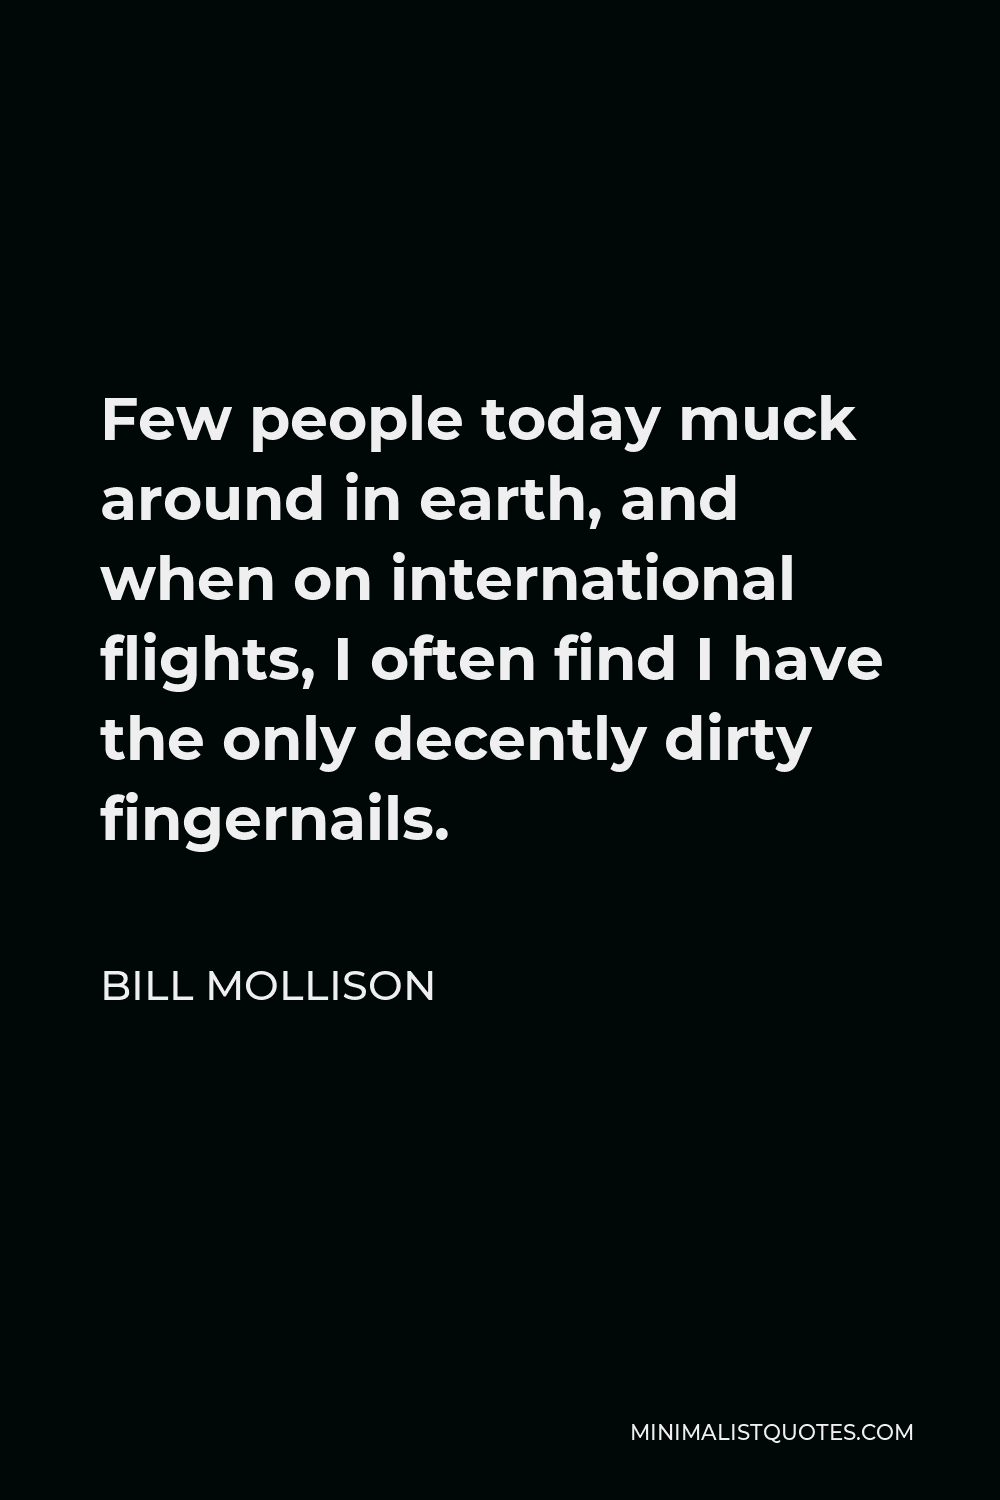 Bill Mollison Quote - Few people today muck around in earth, and when on international flights, I often find I have the only decently dirty fingernails.